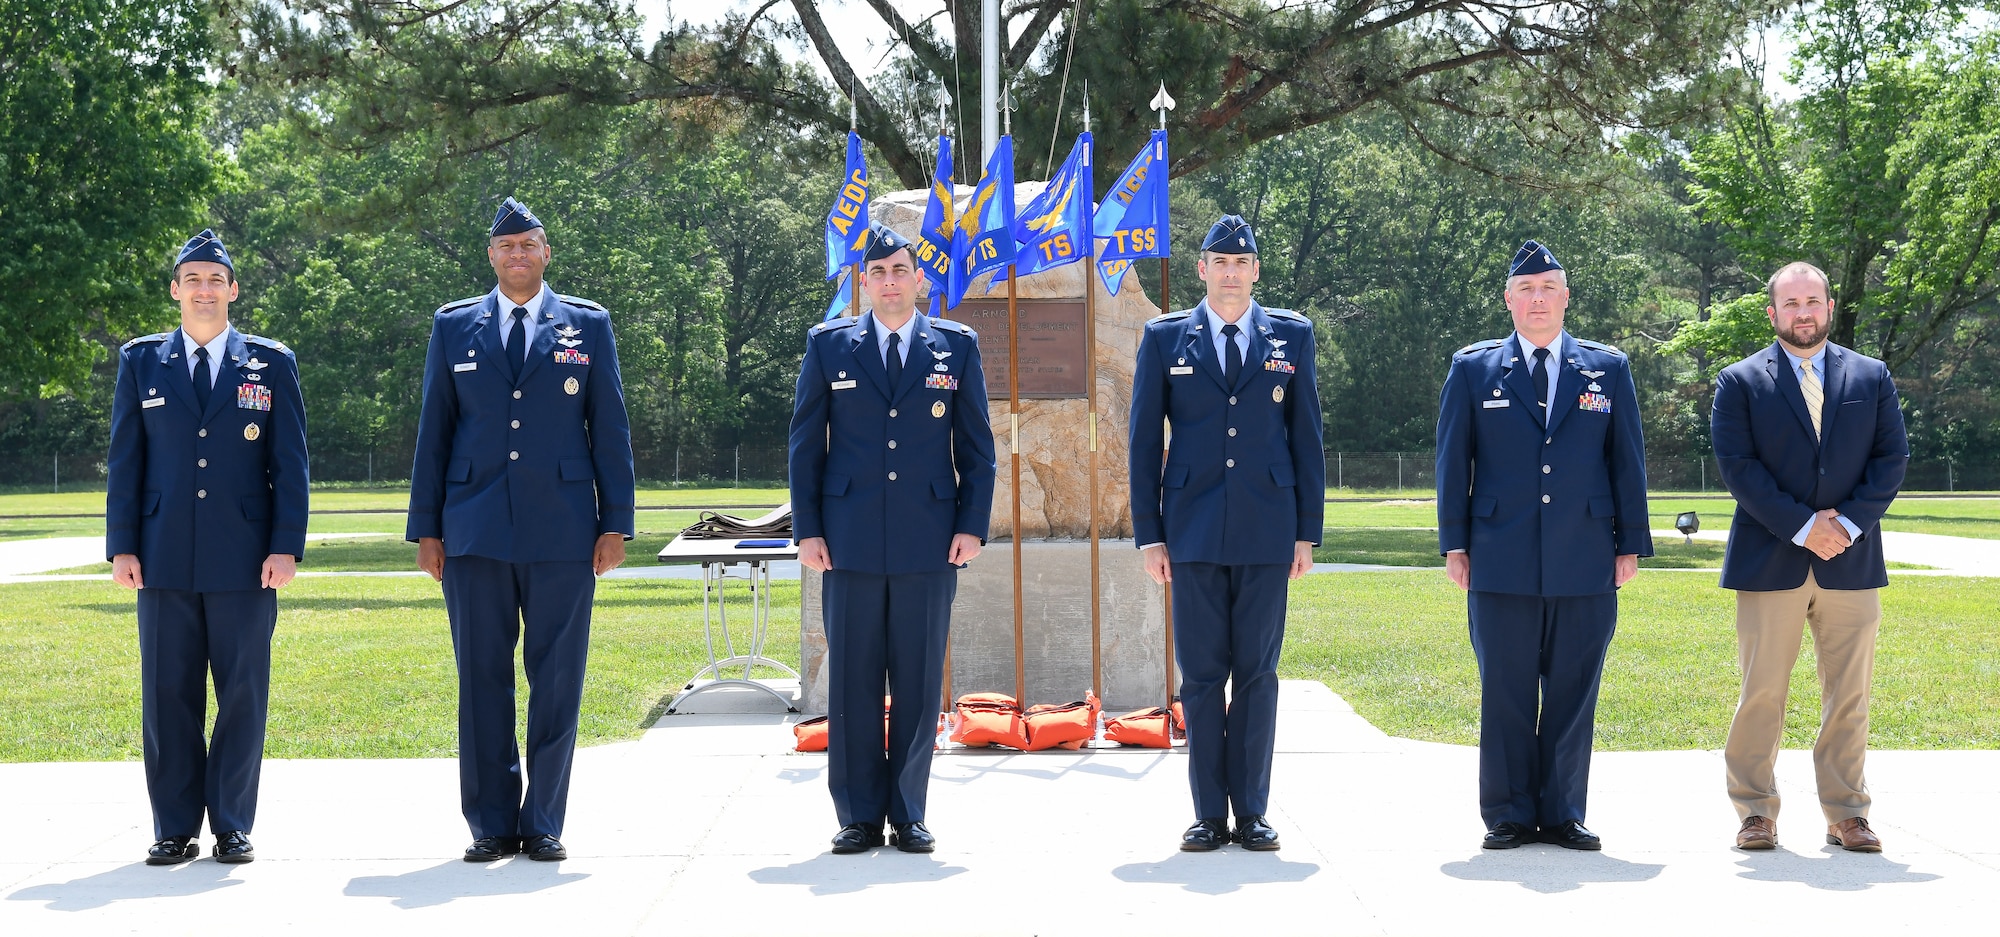 Col. Jeffrey Geraghty, commander, AEDC stands for a photo with the leaders of the newly-activated 804th Test Group, the 716th Test Squadron, 717th Test Squadron, 718th Test Squadron and 804th Test Support Squadron during a ceremony at Arnold Air Force Base, Tenn., May 20, 2022.